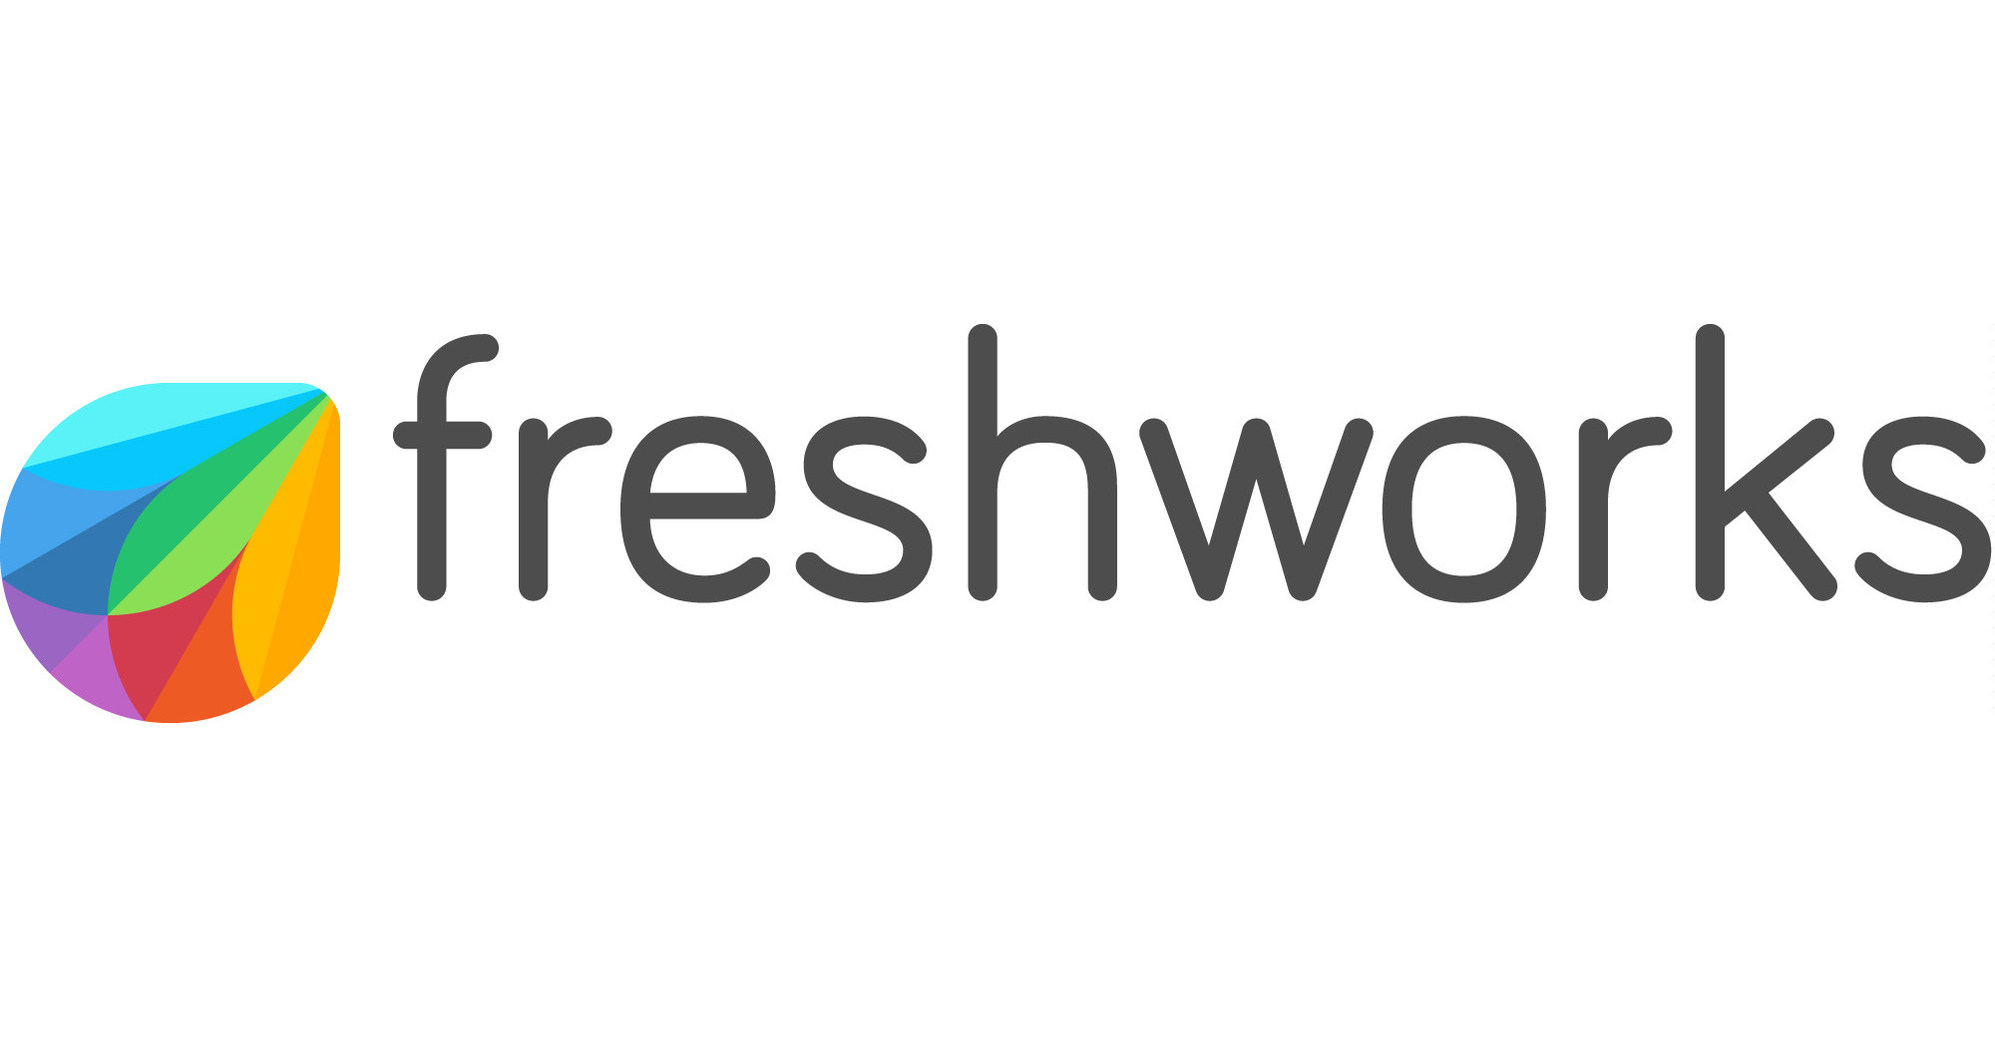 freshworks crosses $300m in arr and closes 2020 with over 40% year over year arr growth